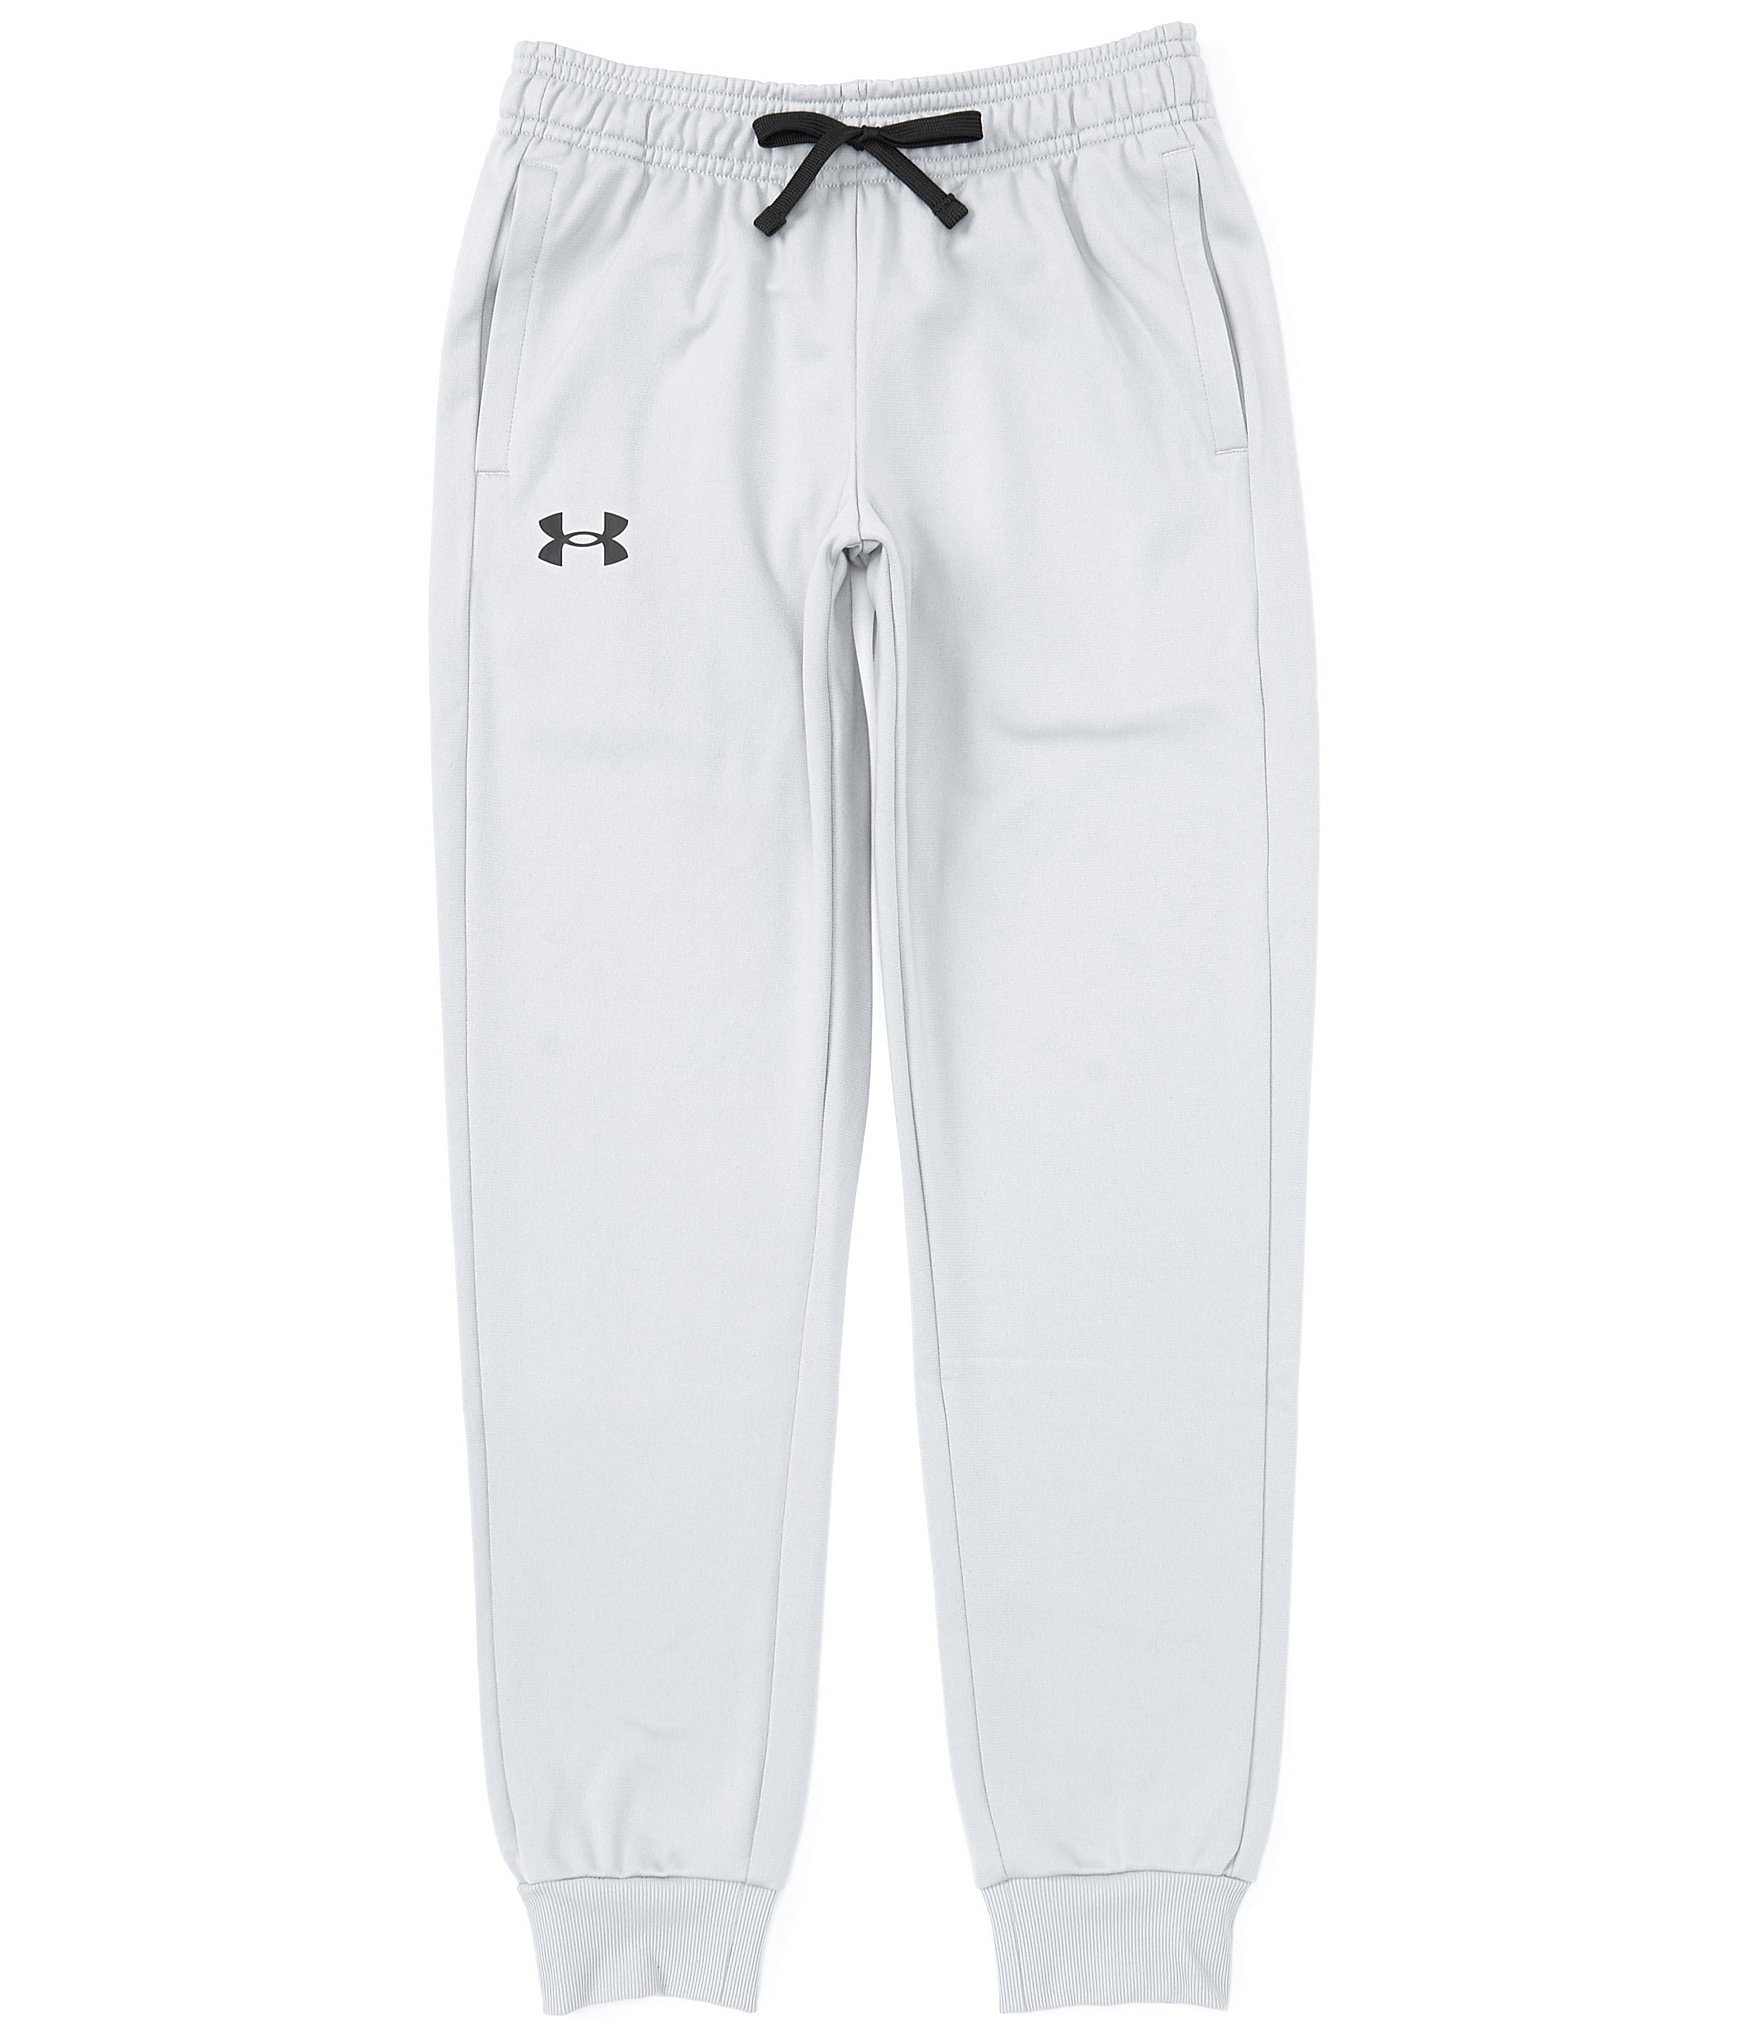 Under Armour Boy's Brawler 2.0 Tapered Pants